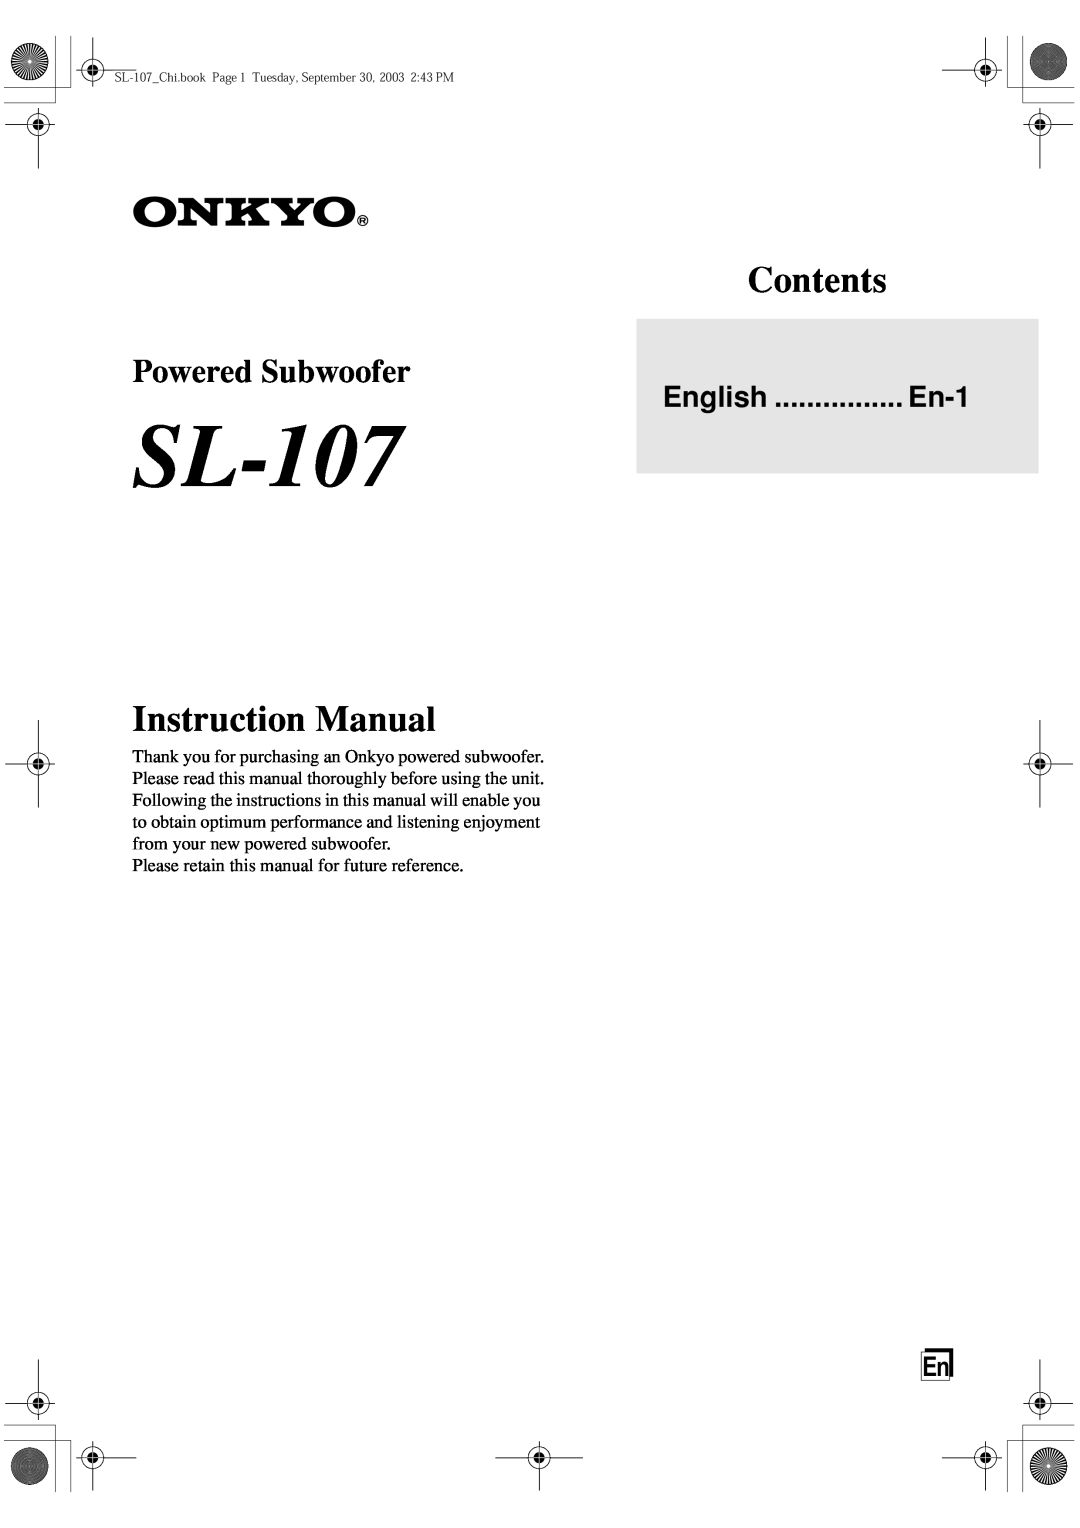 Onkyo SL-107 instruction manual Contents, Powered Subwoofer, English ................ En-1 